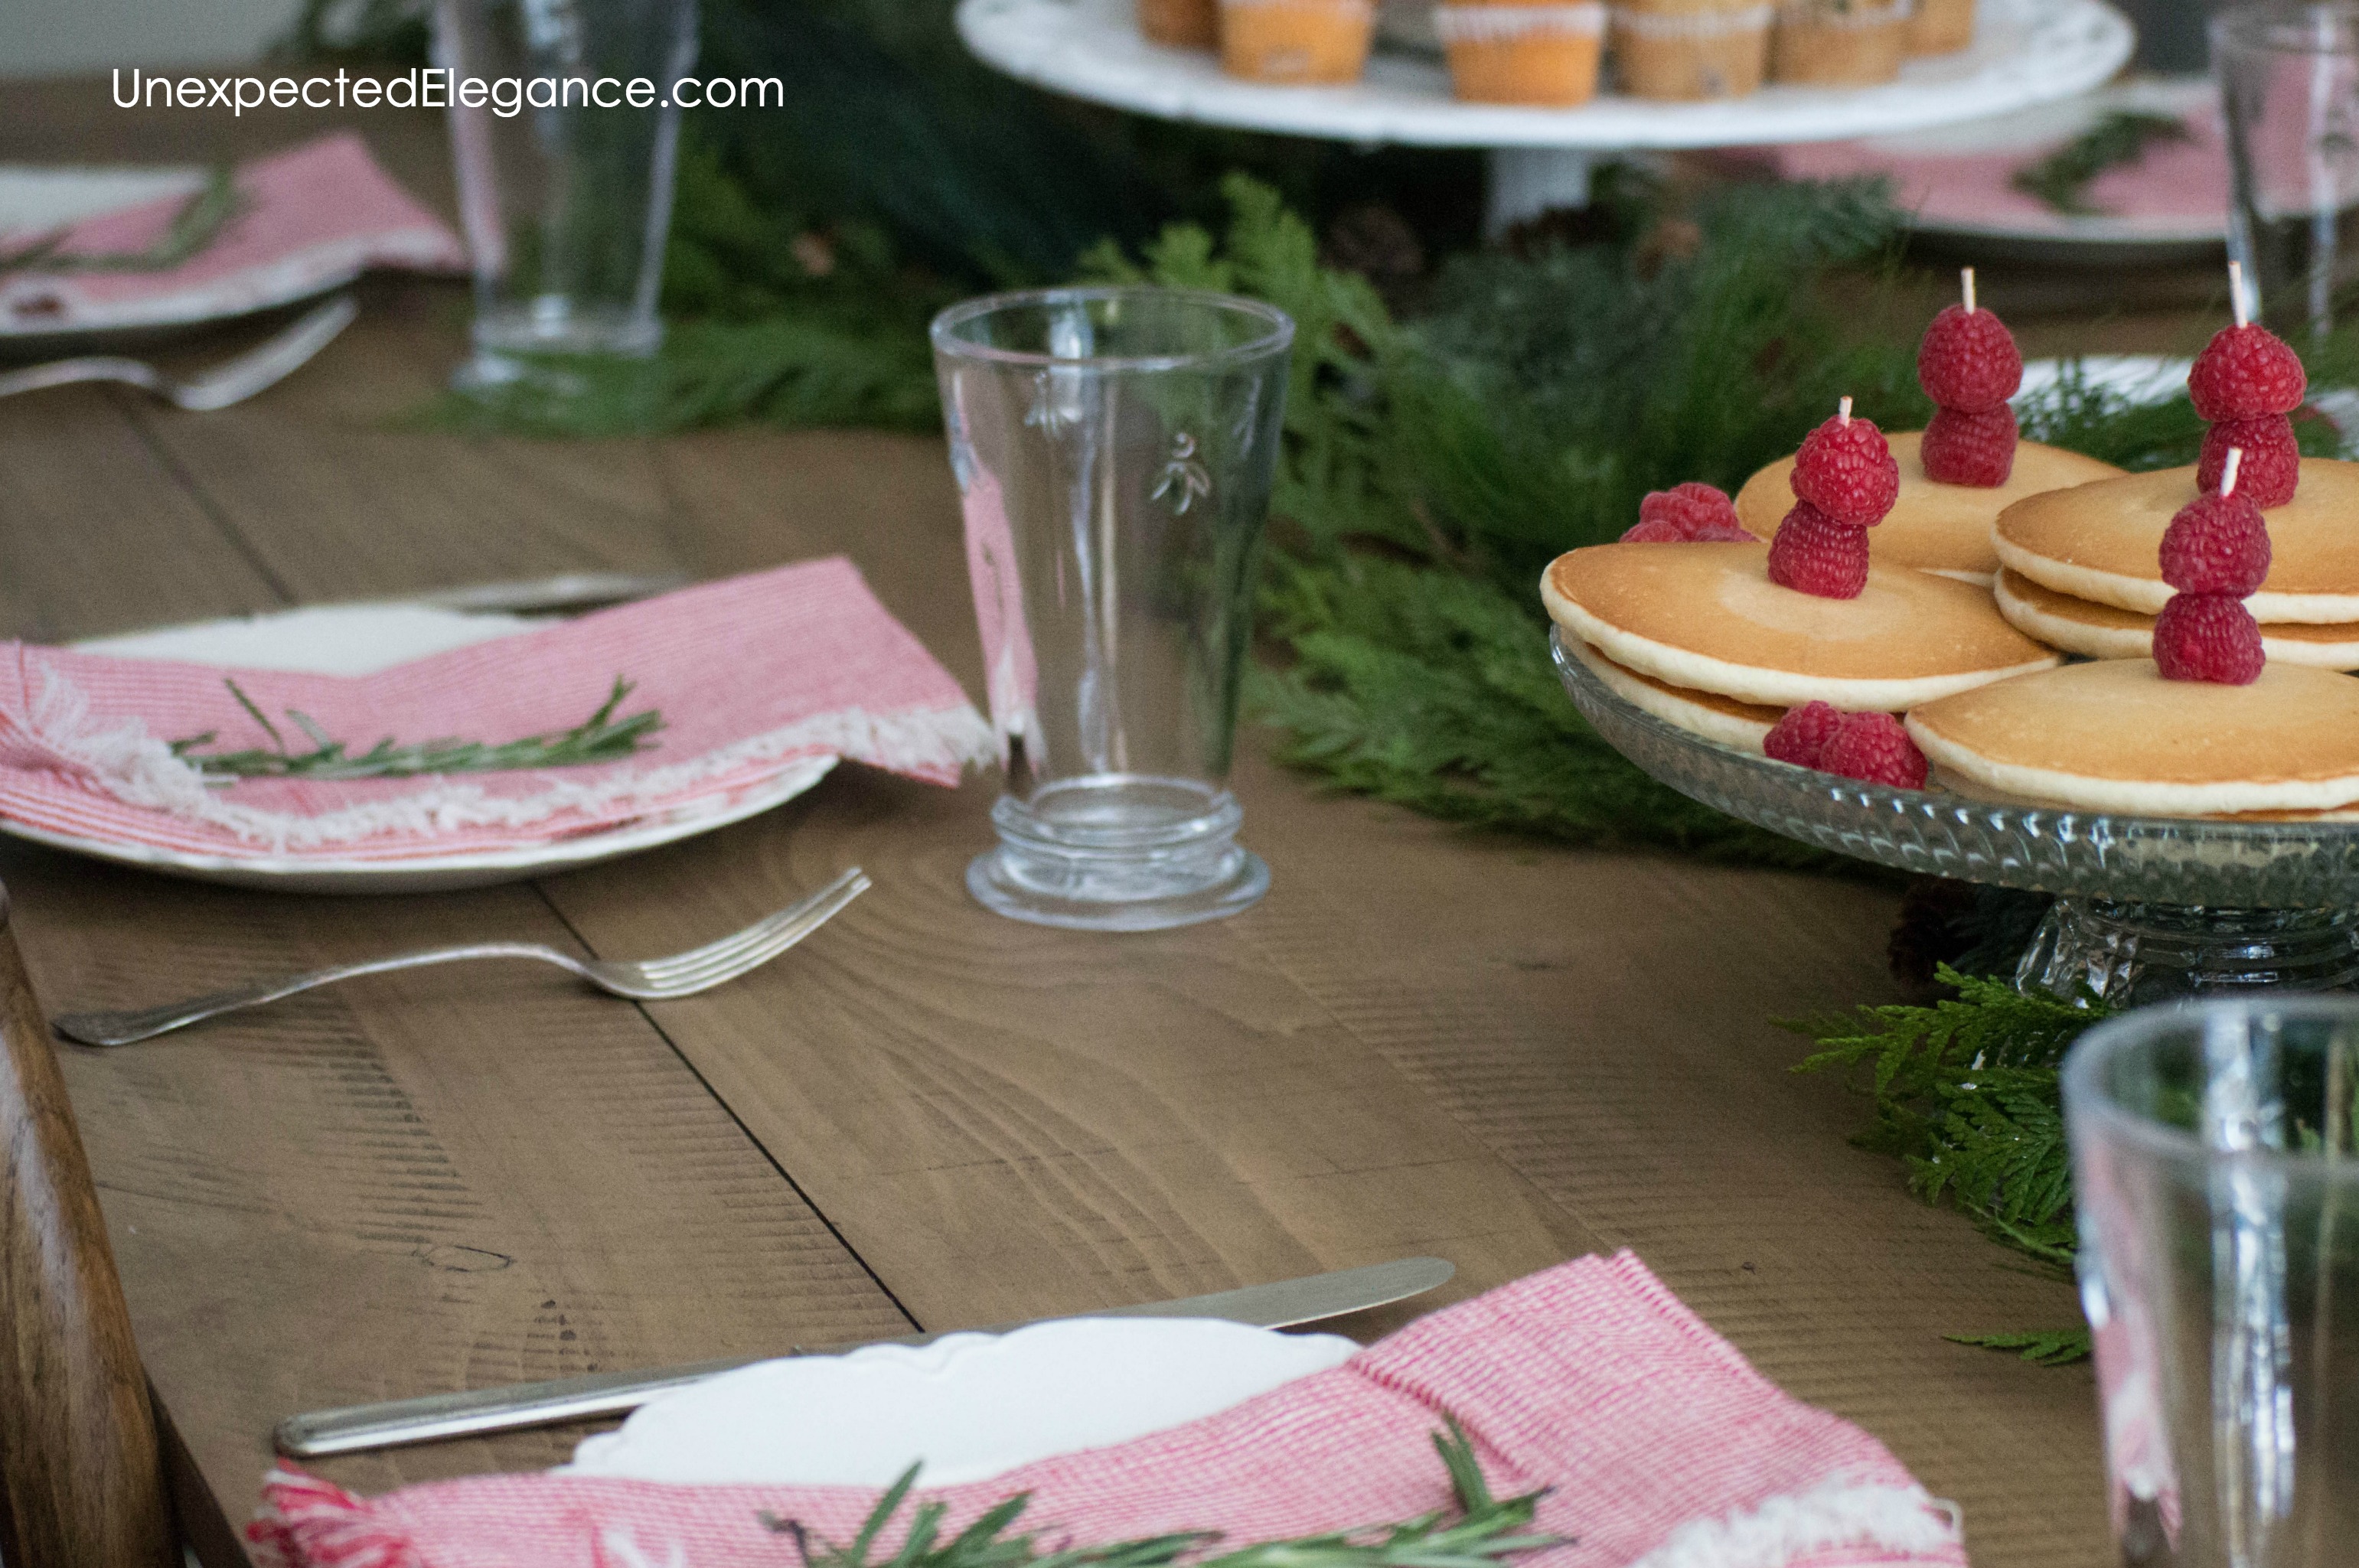 Kick off the holiday season and throw together a quick brunch for some of your girlfriends! This simple Christmas Brunch will give you time to relax and enjoy the hustle and bustle.